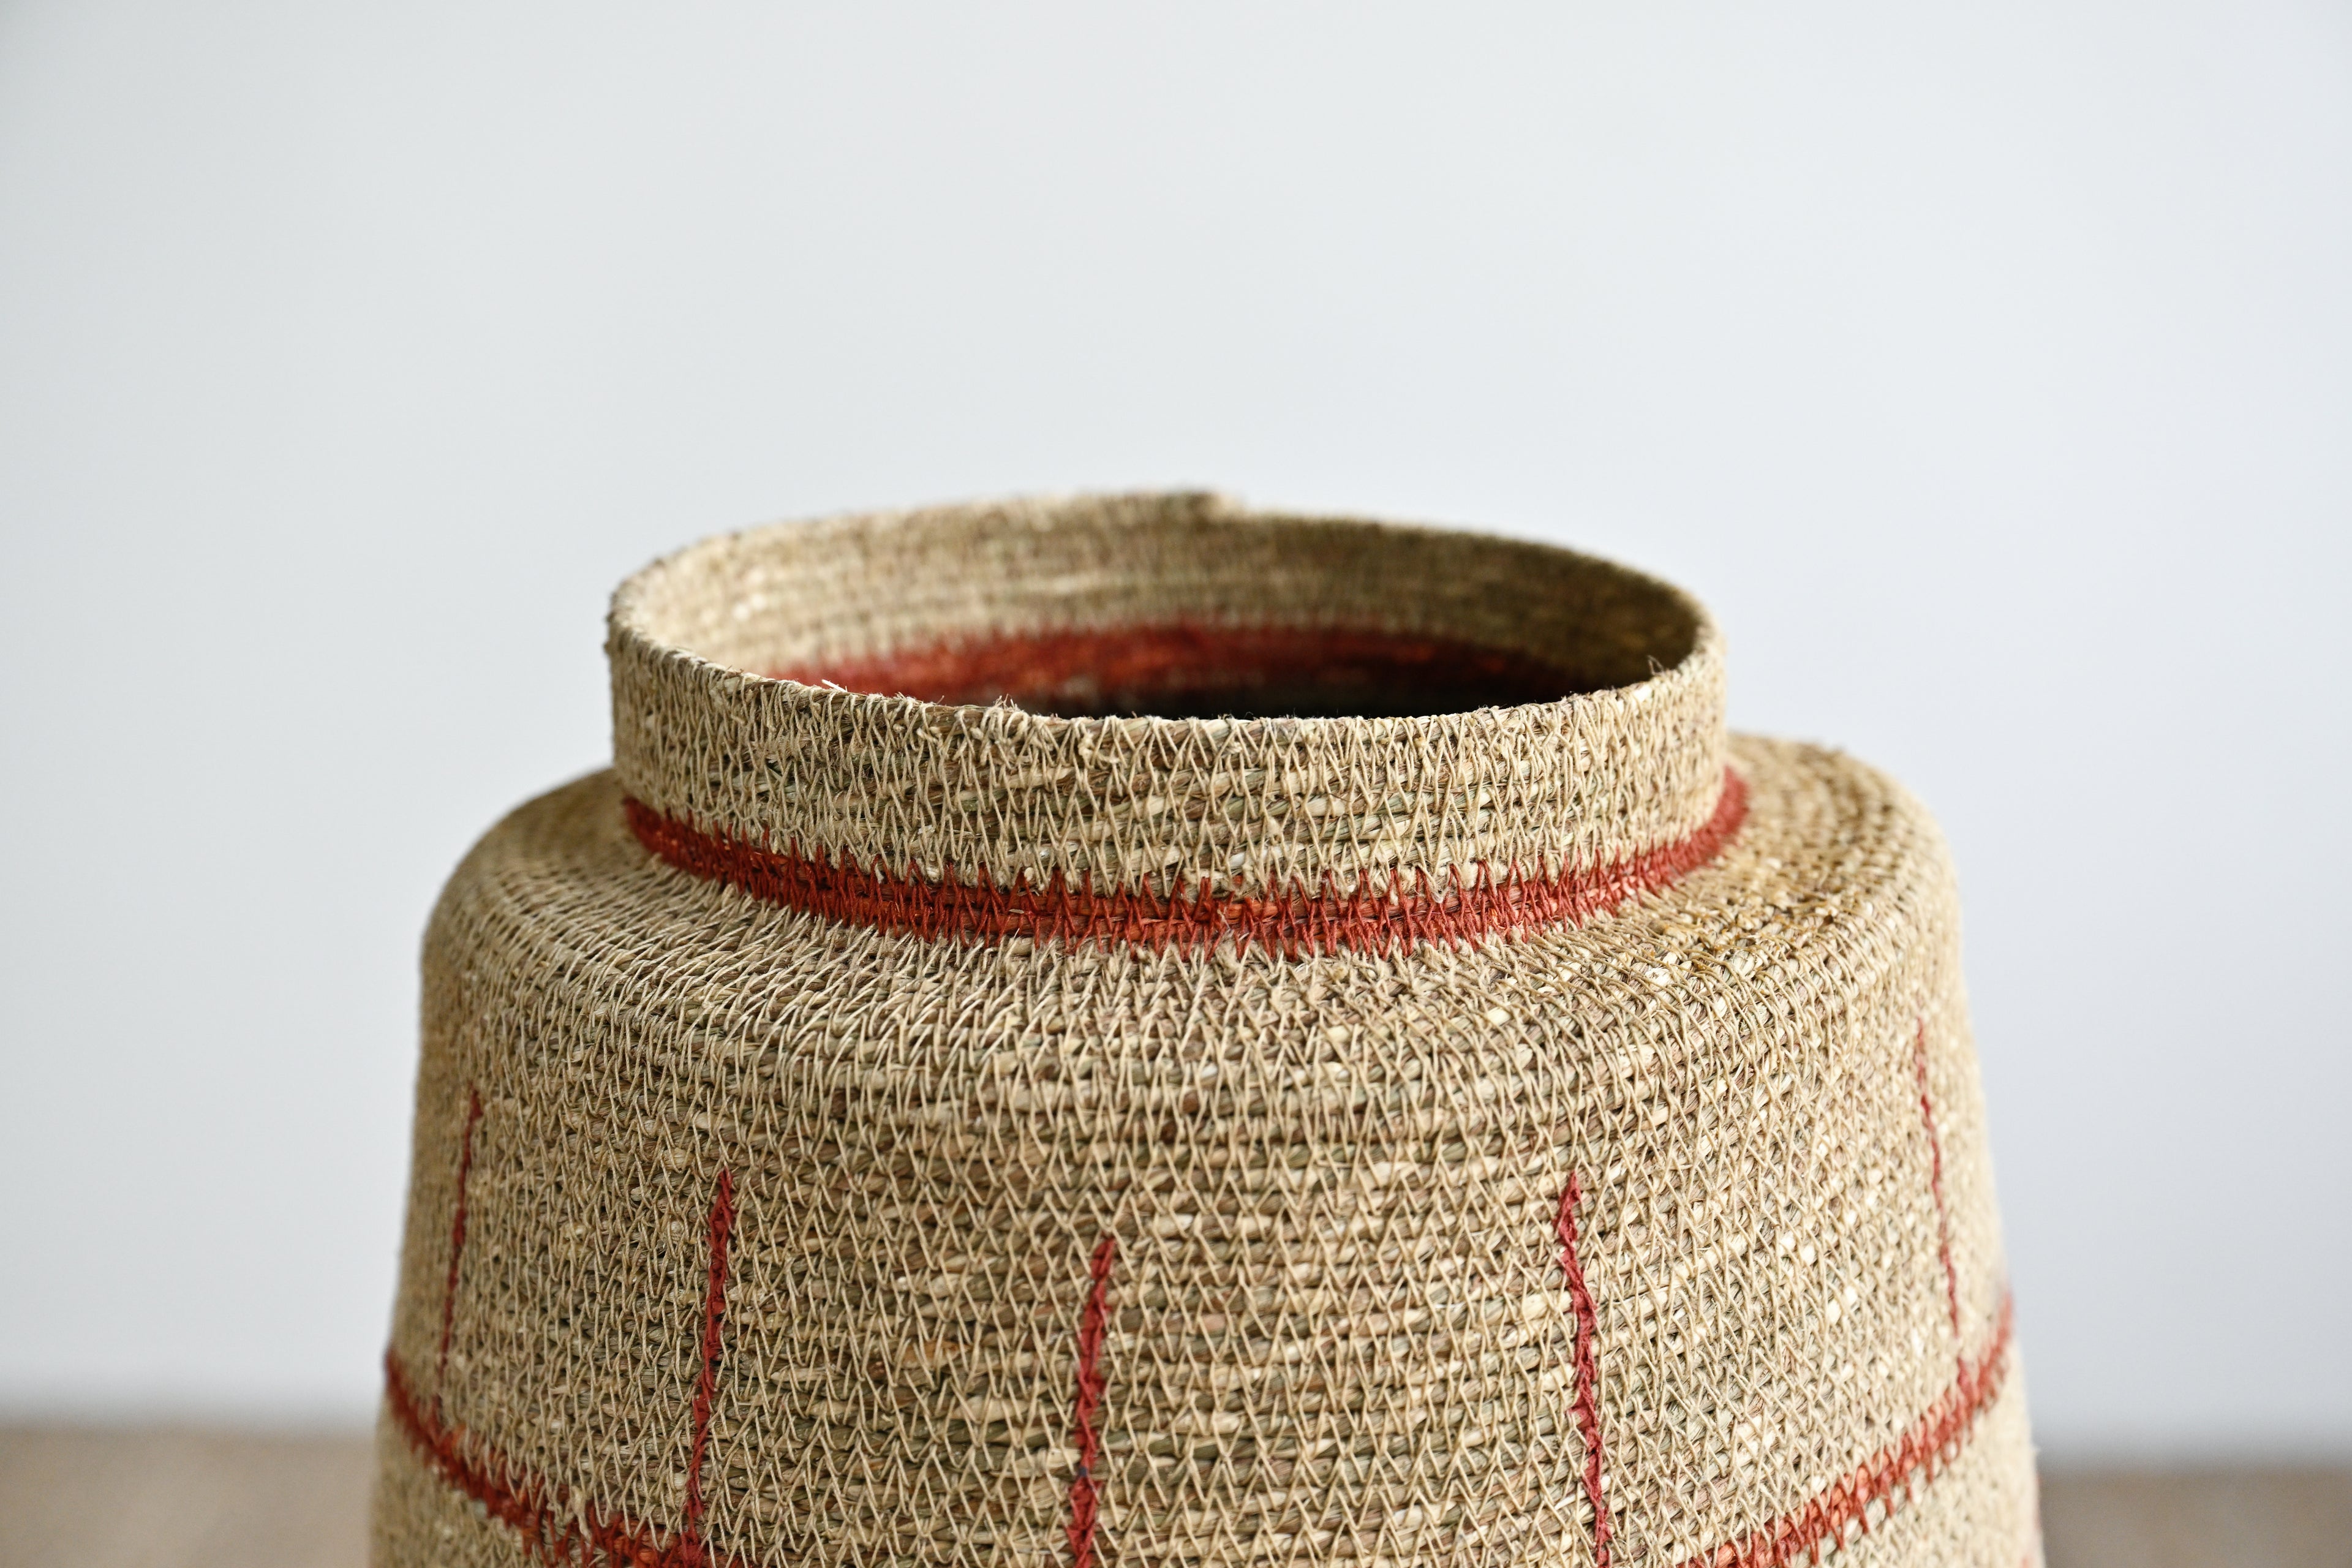 Zouk Woven Basket with Thick Stripes